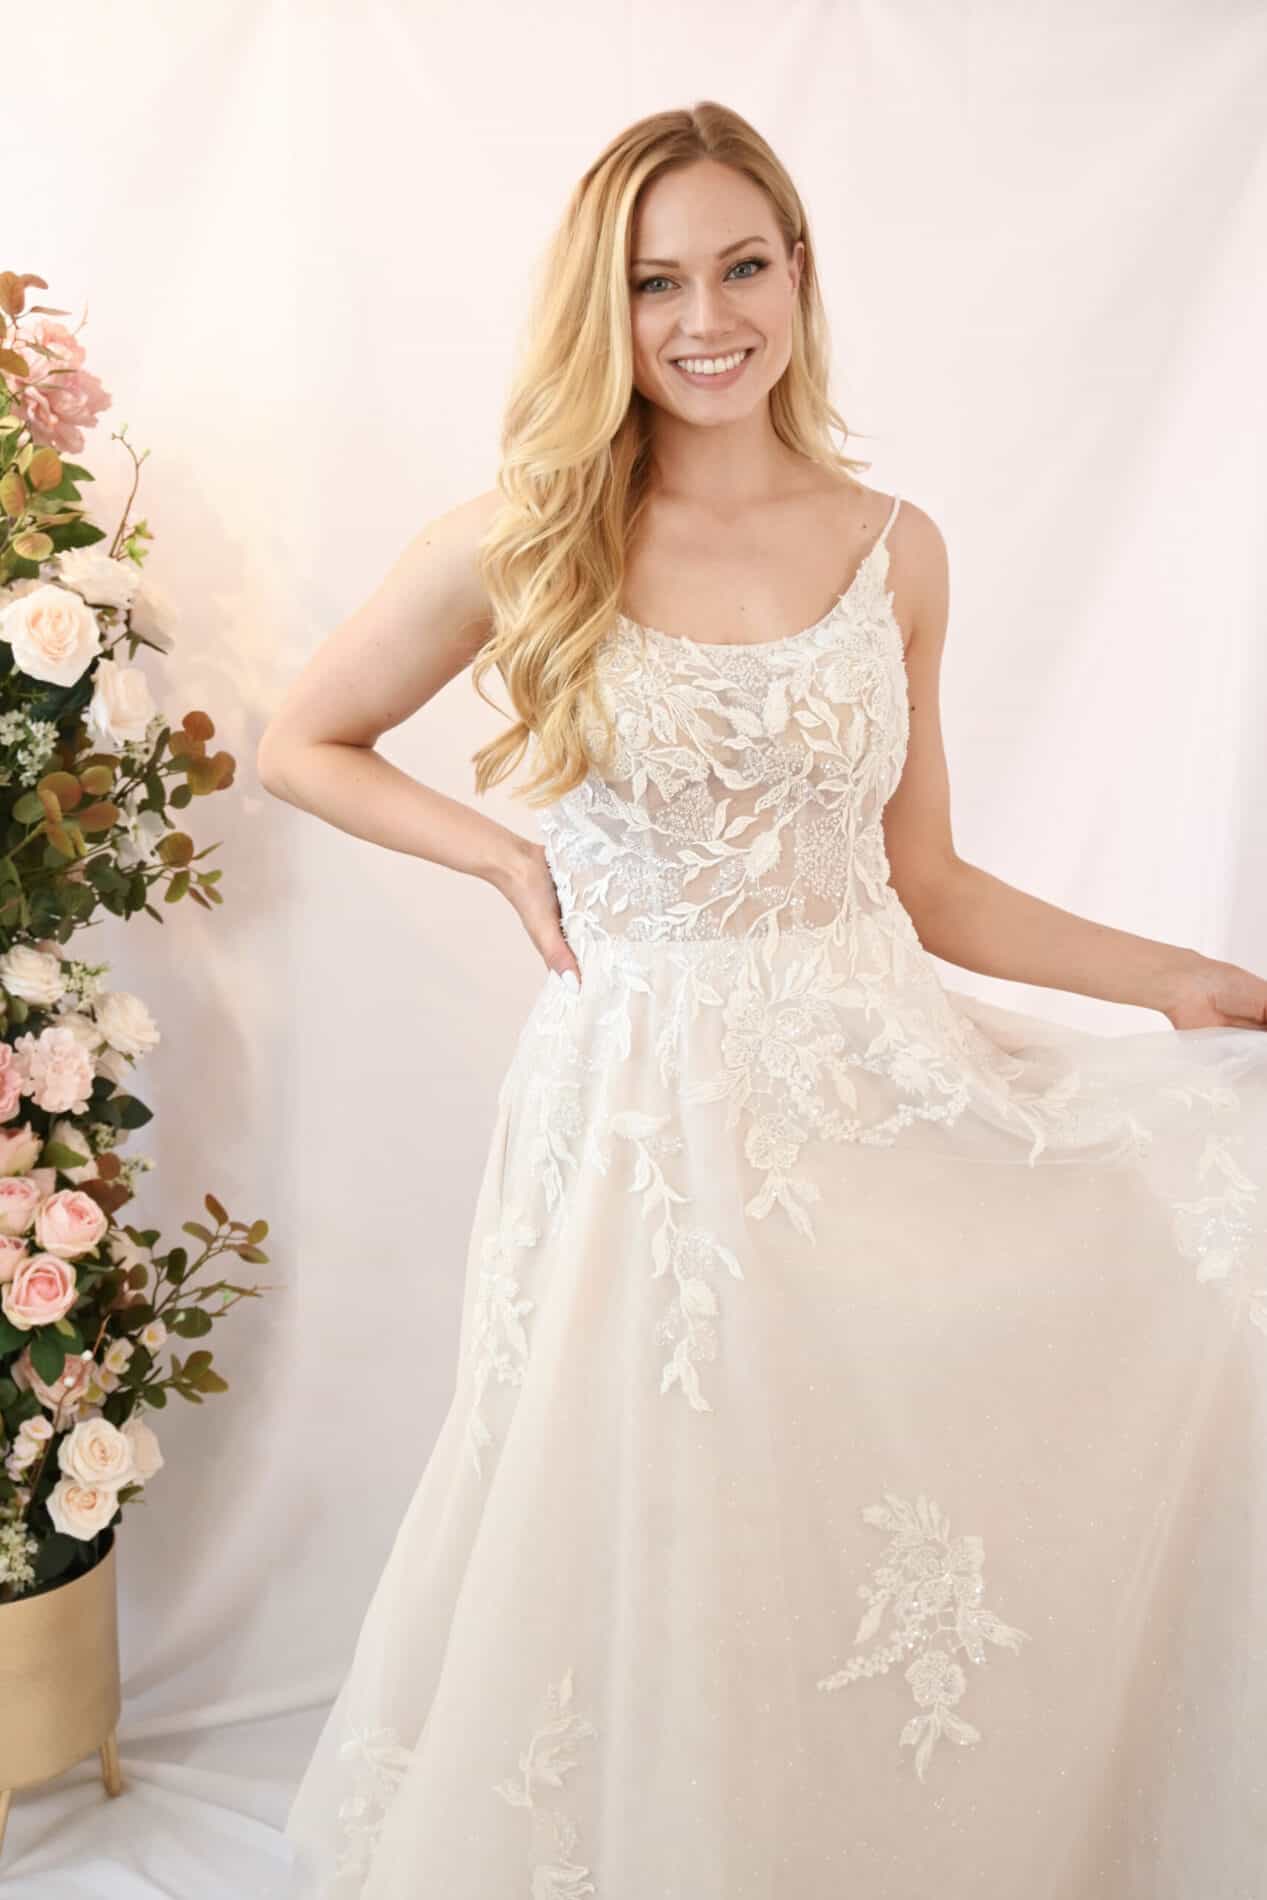 Savvy Bridal Scoop Neck A-Line Romantic beaded floral lace wedding dress - Dolce